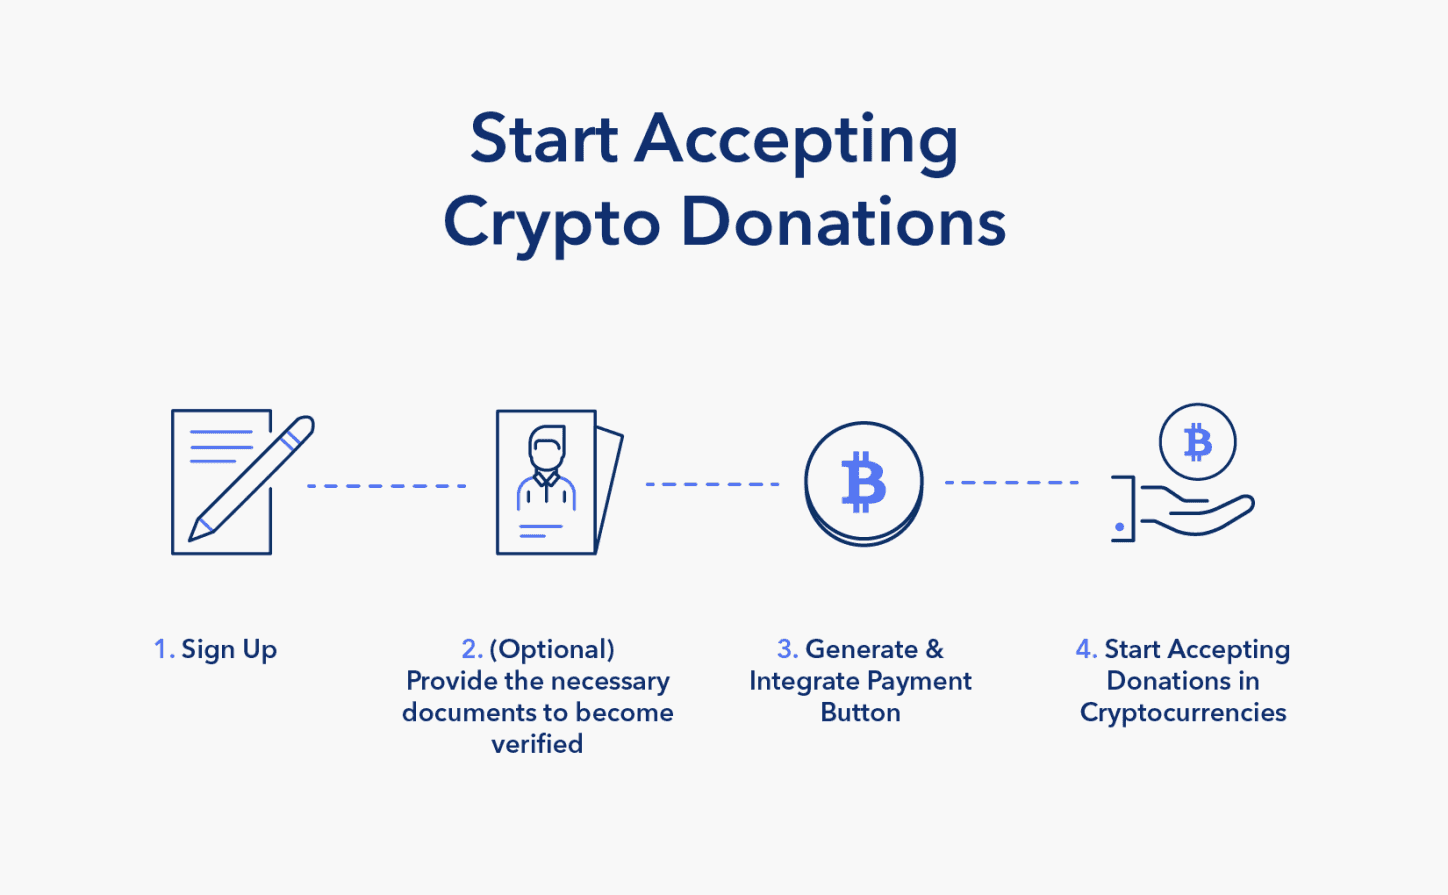 Infographic showing four steps necessary to start accepting crypto donations.